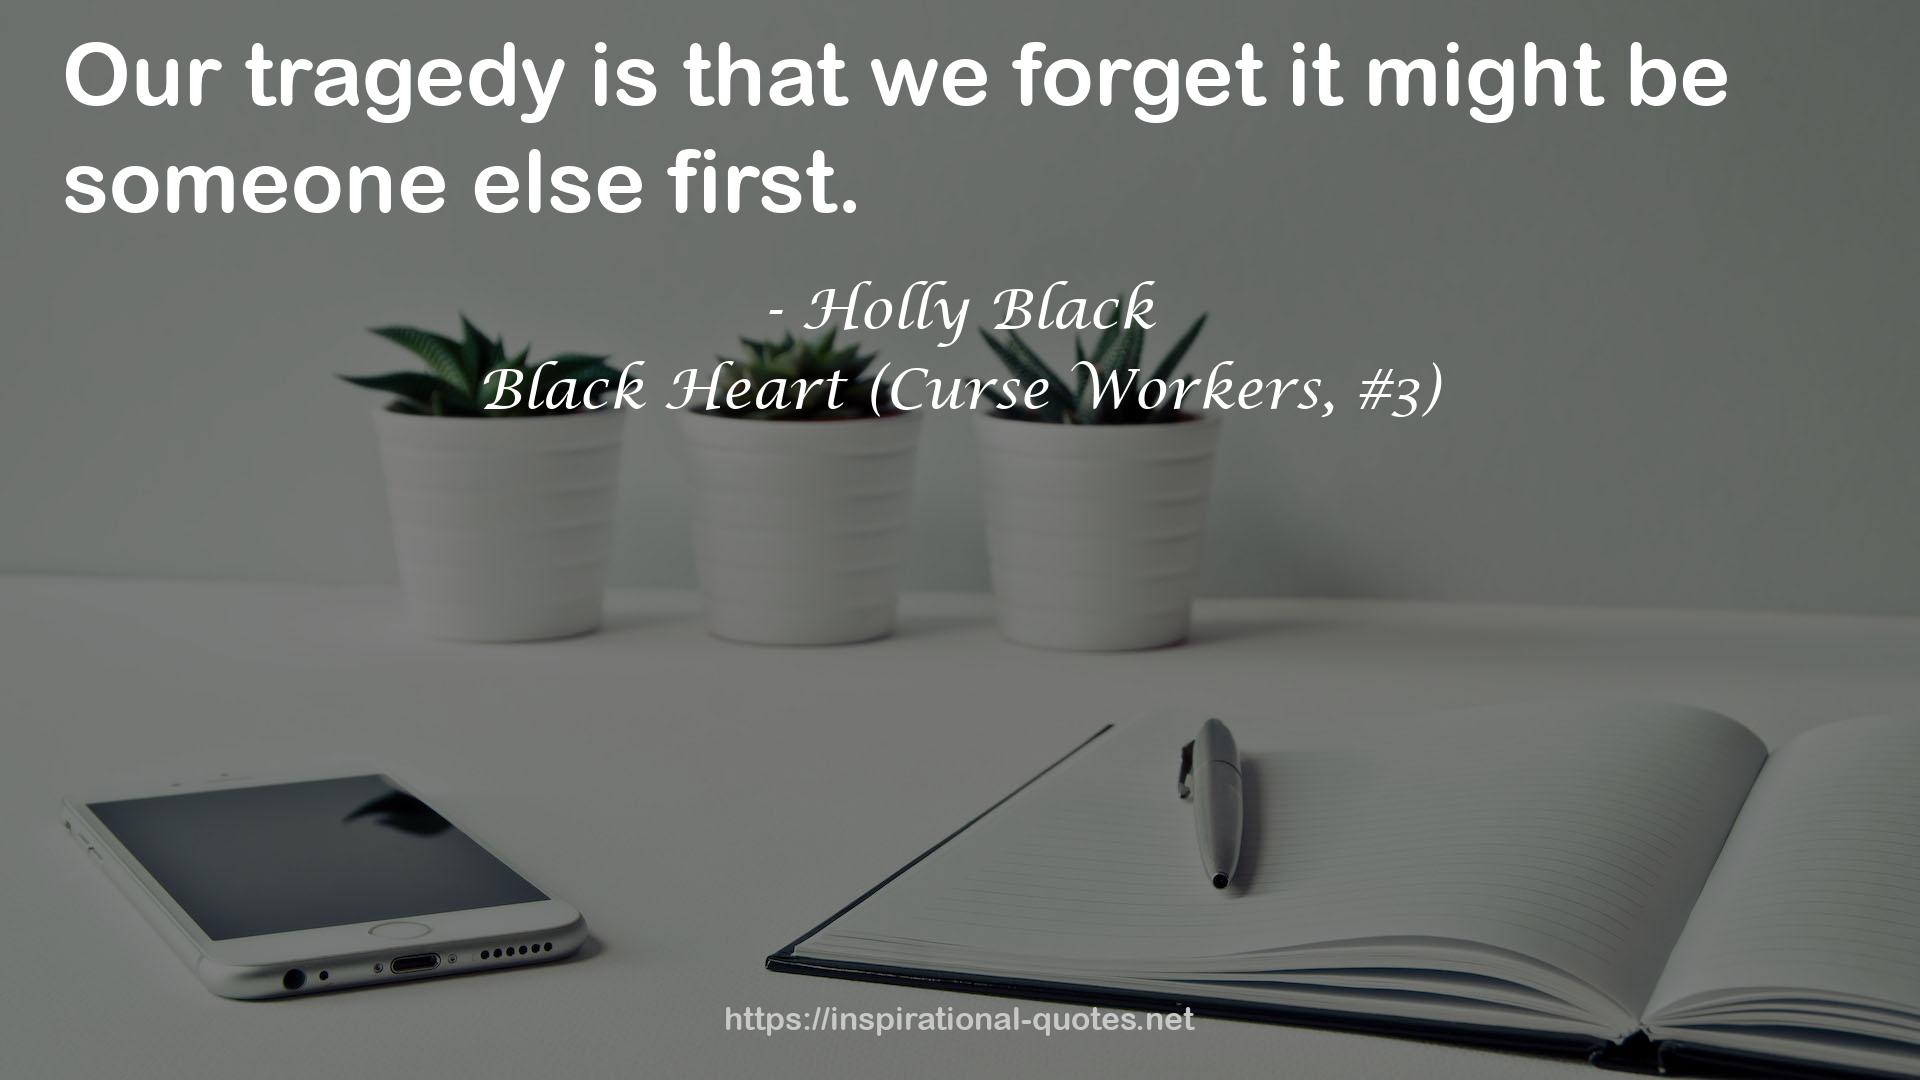 Black Heart (Curse Workers, #3) QUOTES